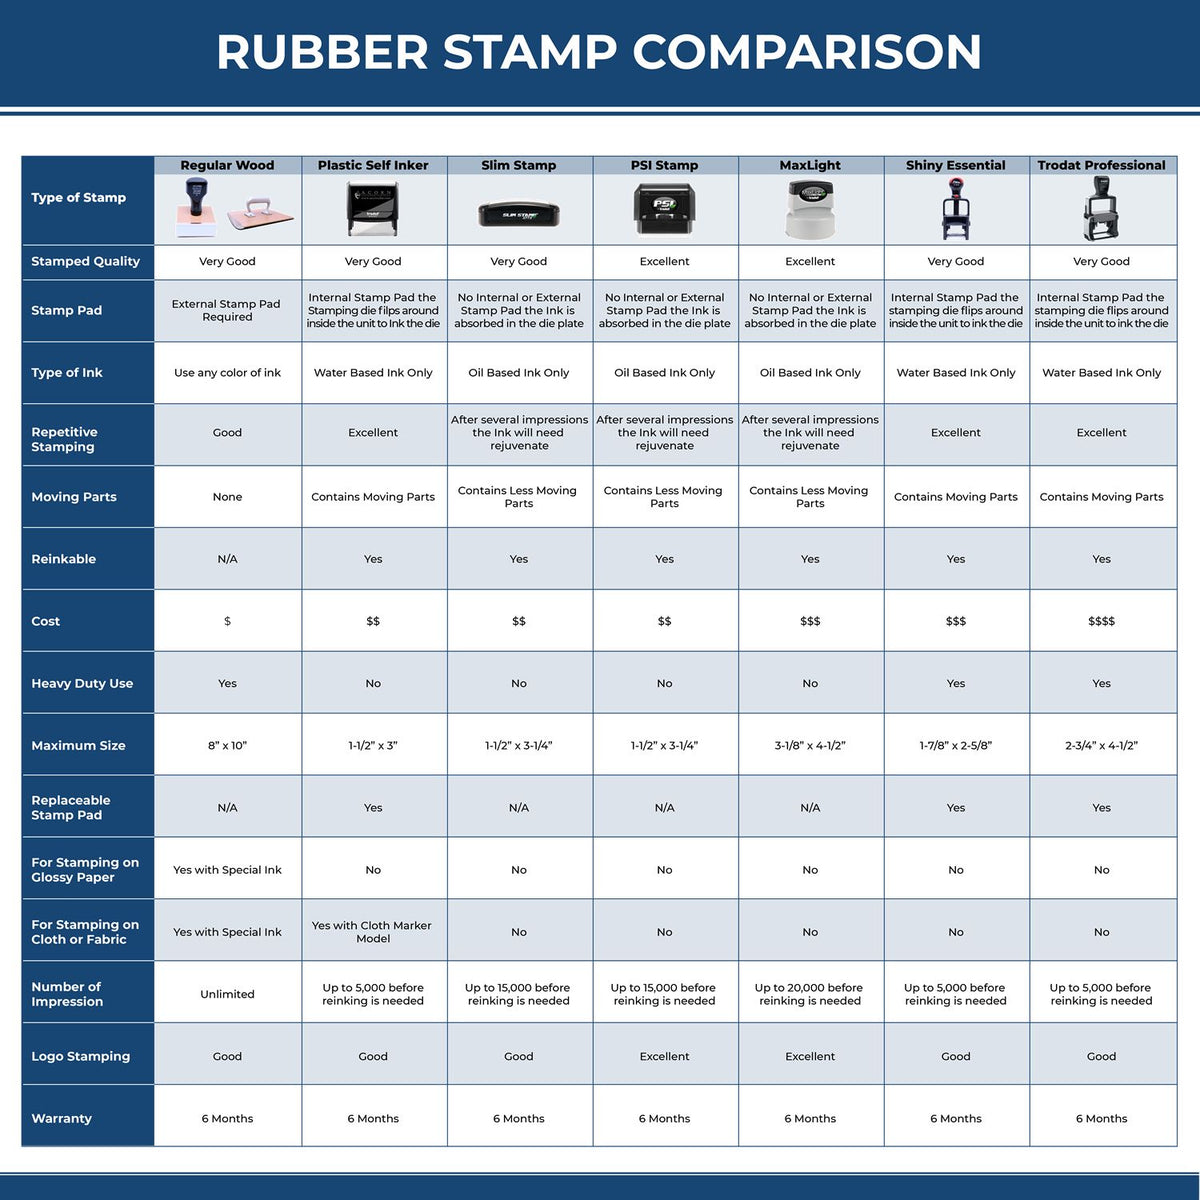 A comparison chart for the different types of mount models available for the Minnesota Professional Engineer Seal Stamp.